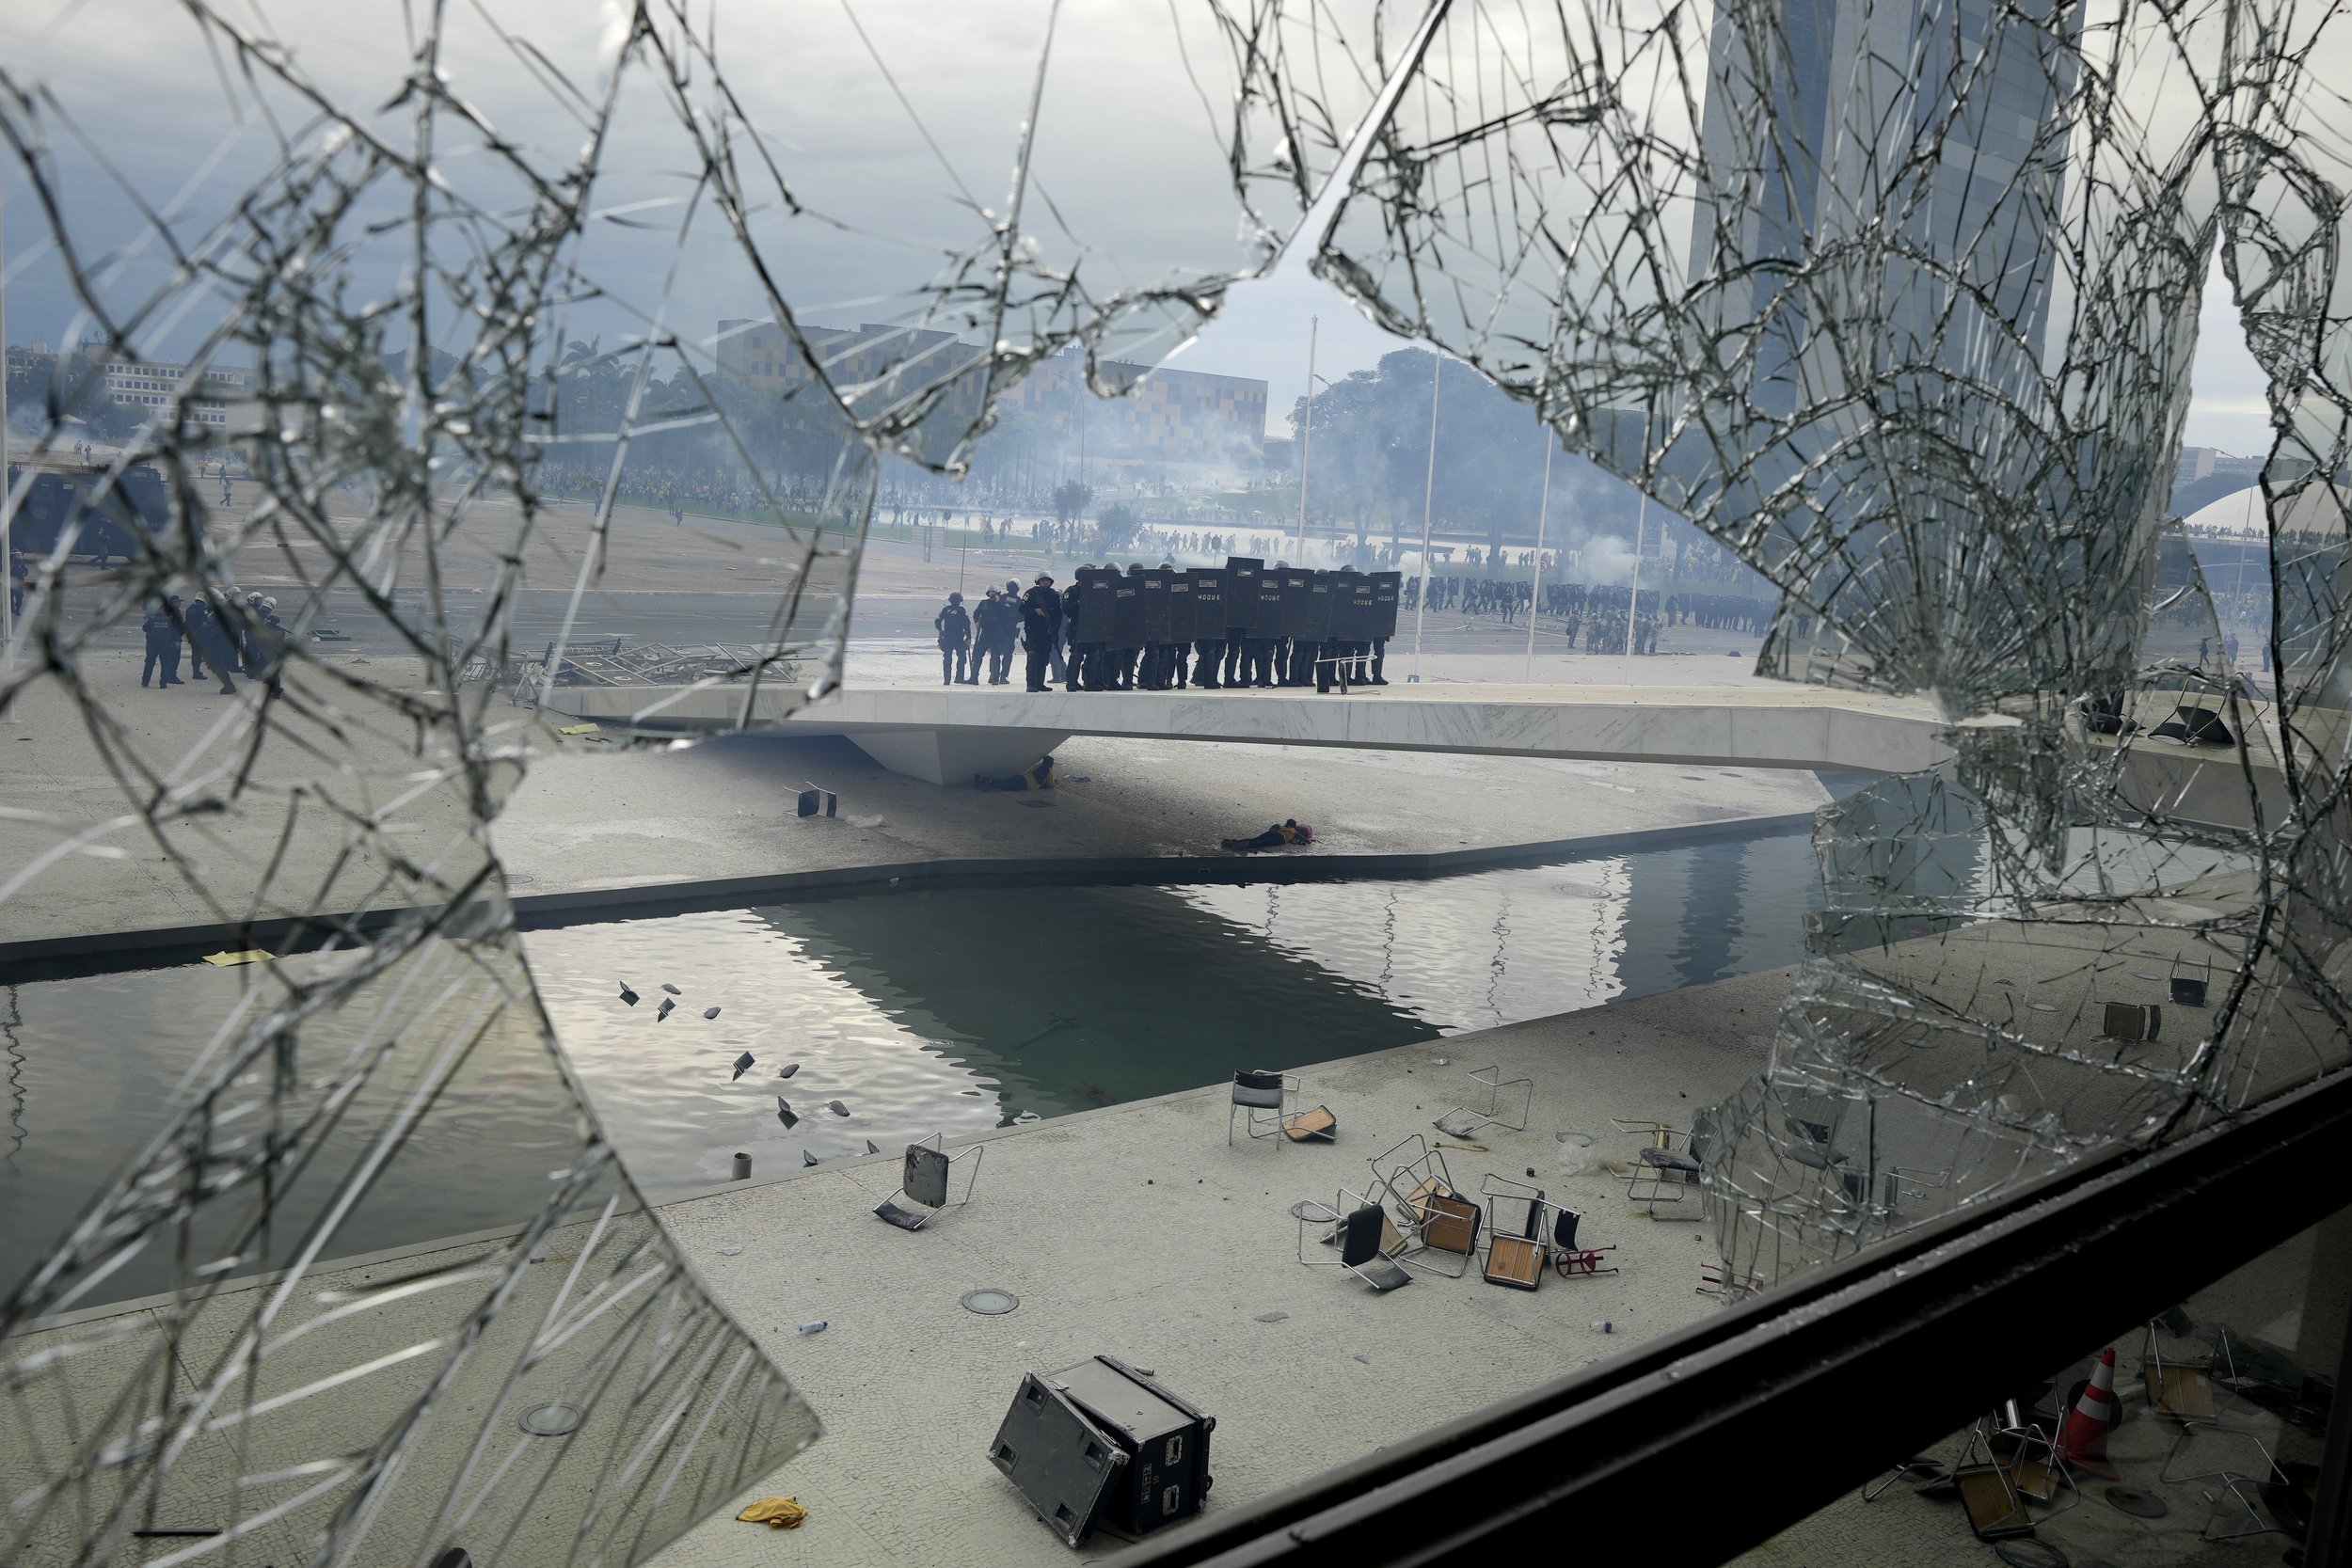  Police stand outside Planalto Palace, the official workplace of Brazil’s president in Brasilia, as seen through a shattered window after supporters of Brazil's former President Jair Bolsonaro stormed the building on Jan. 8, 2023. (AP Photo/Eraldo Pe